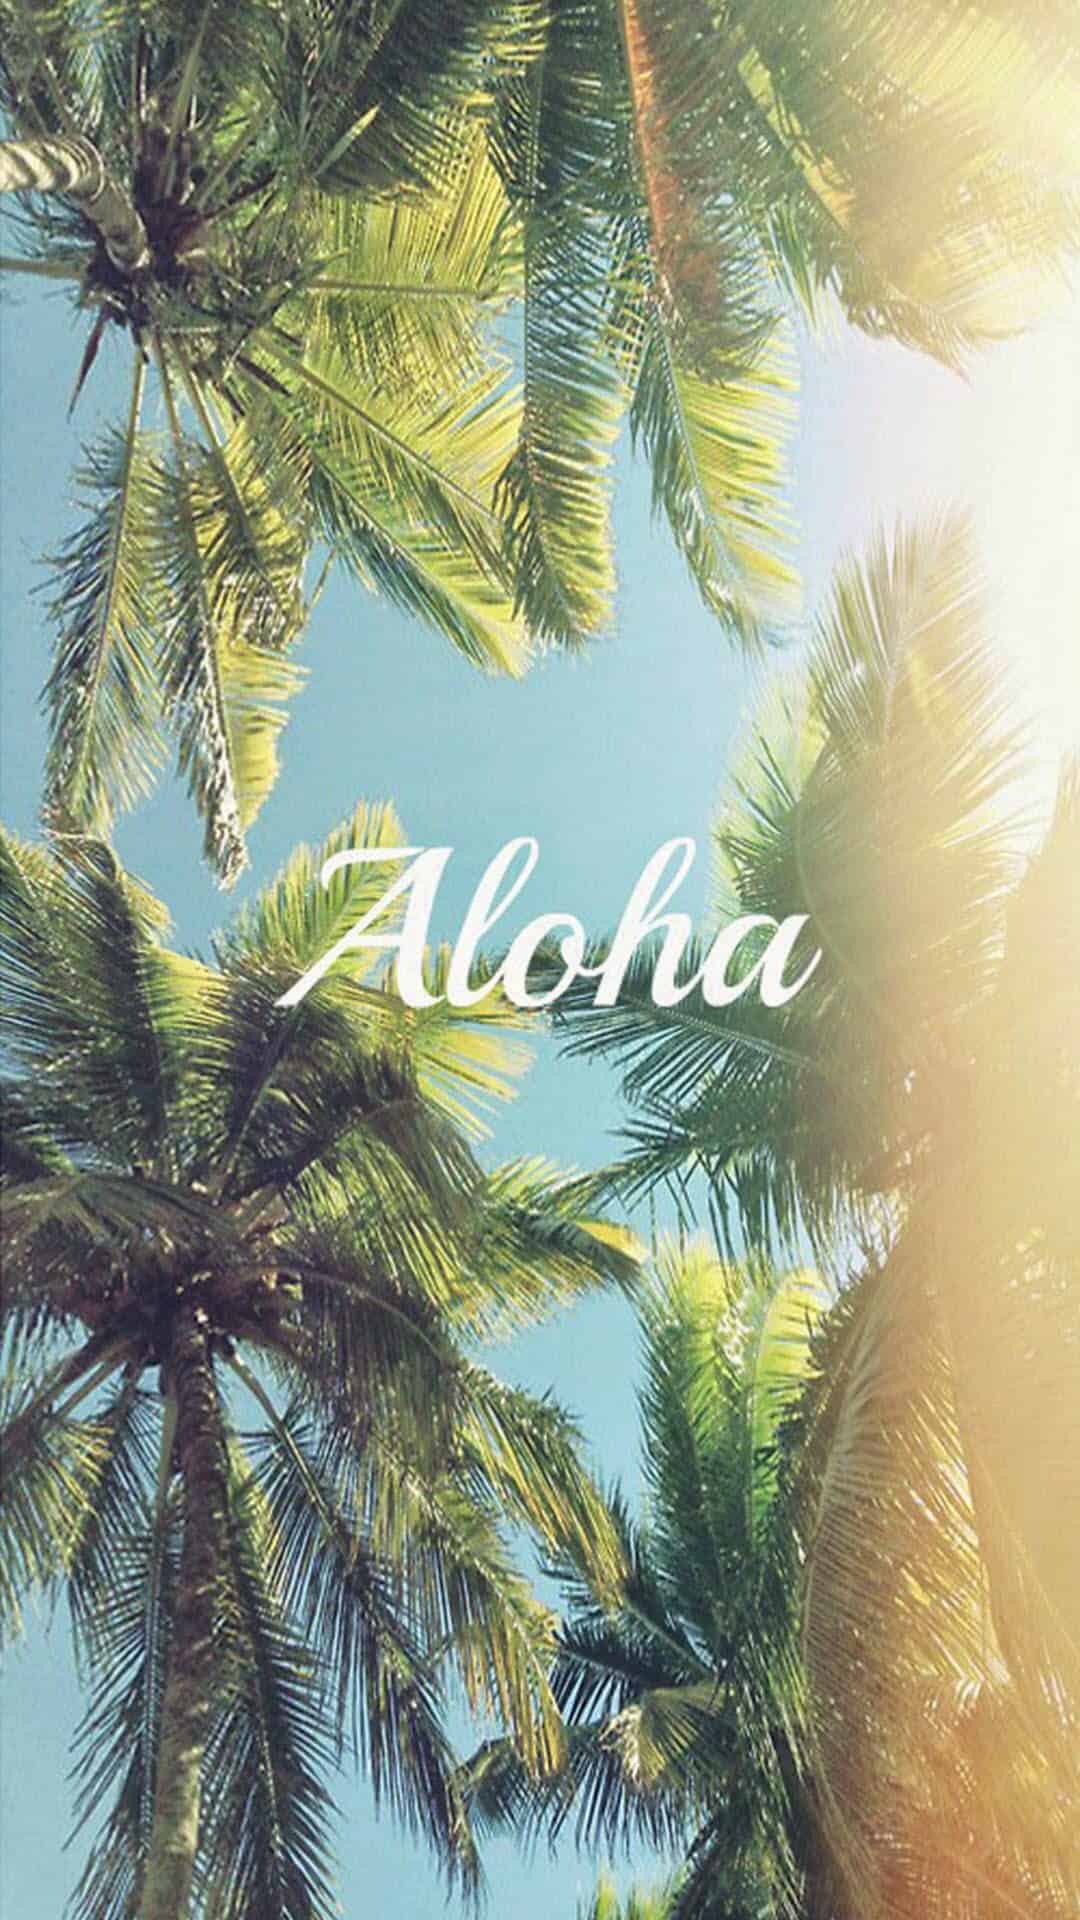 The cover of an album with palm trees and a sun - Coconut, Hawaii